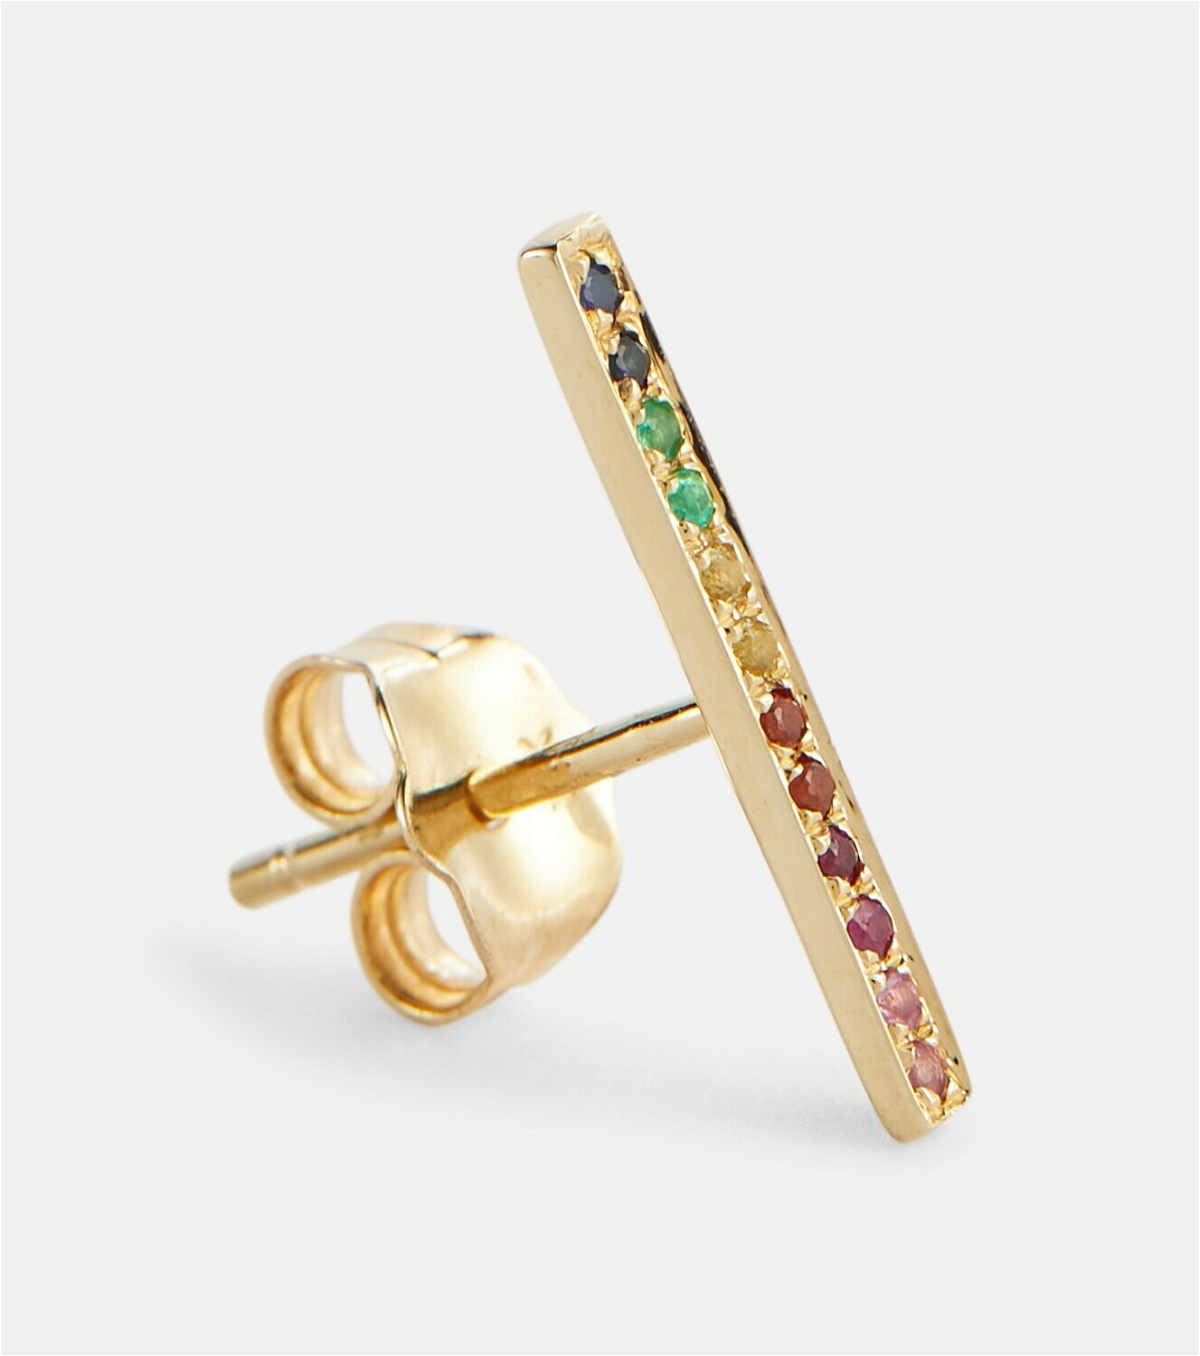 Sydney Evan Rainbow 14kt gold single earring with rubies, emeralds and sapphires